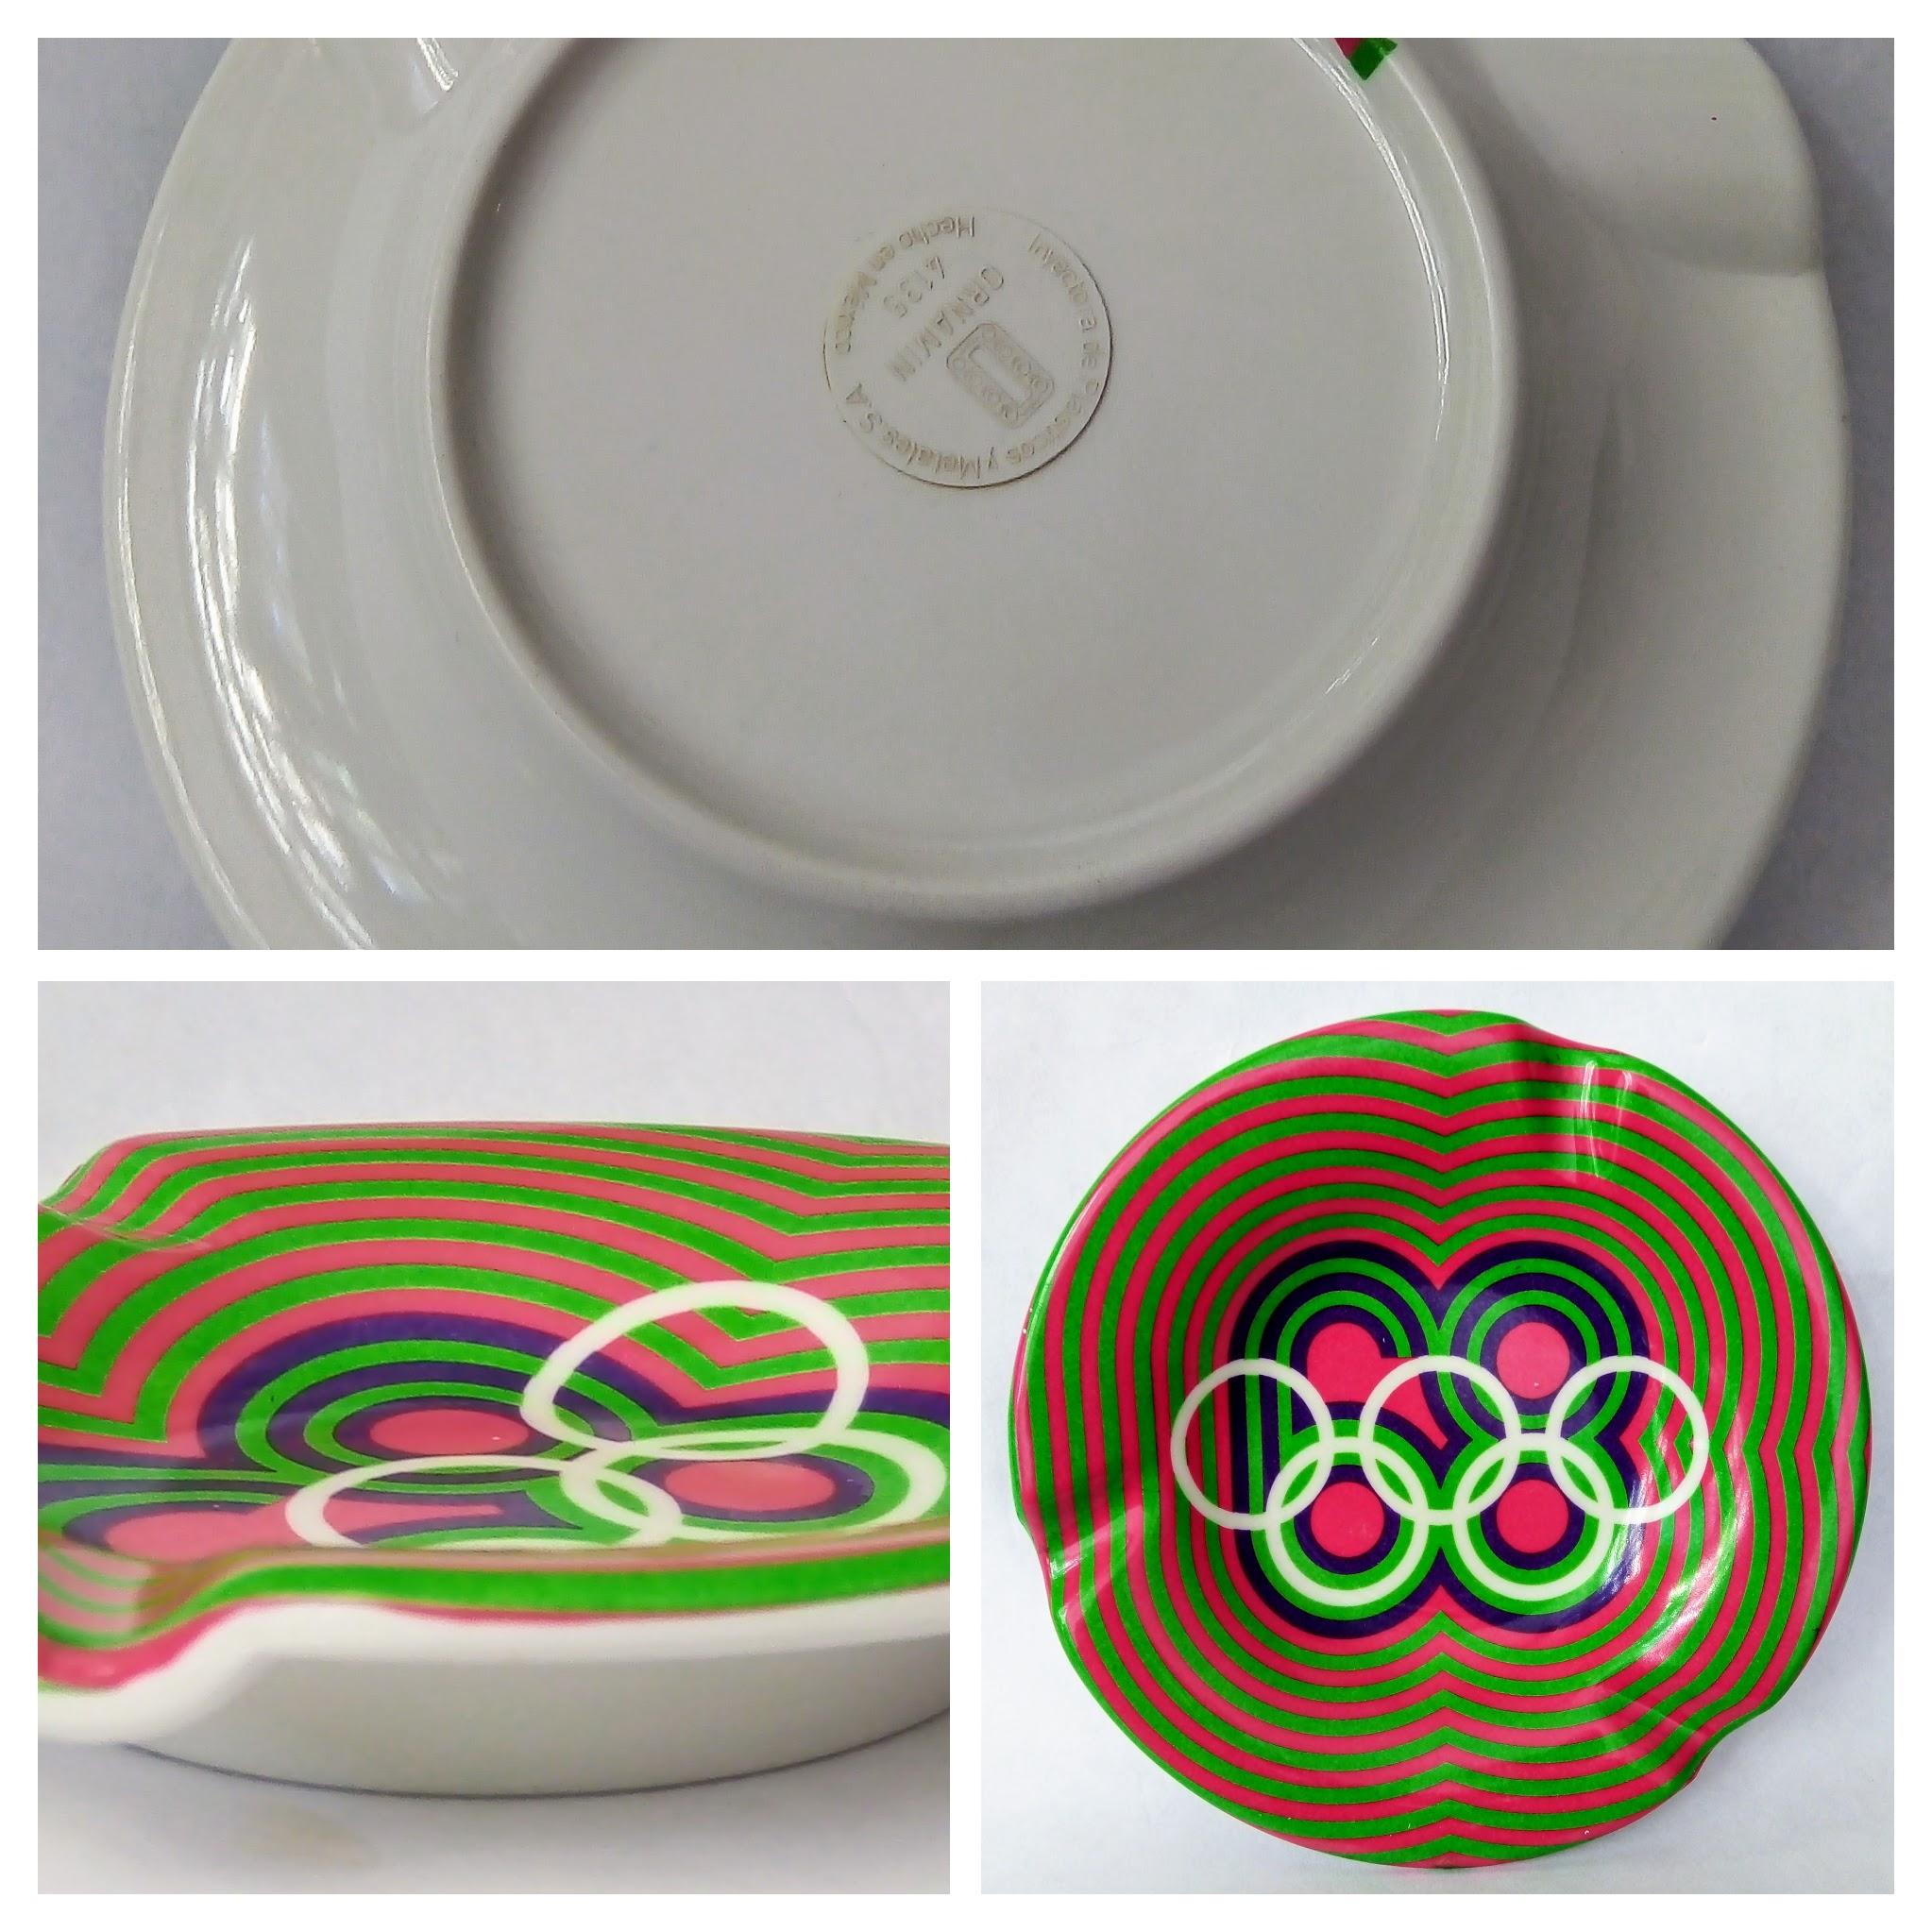 Plastic Amazing Set of 5 Original Ashtrays from Mexico68 Olympic Games in Striking Color